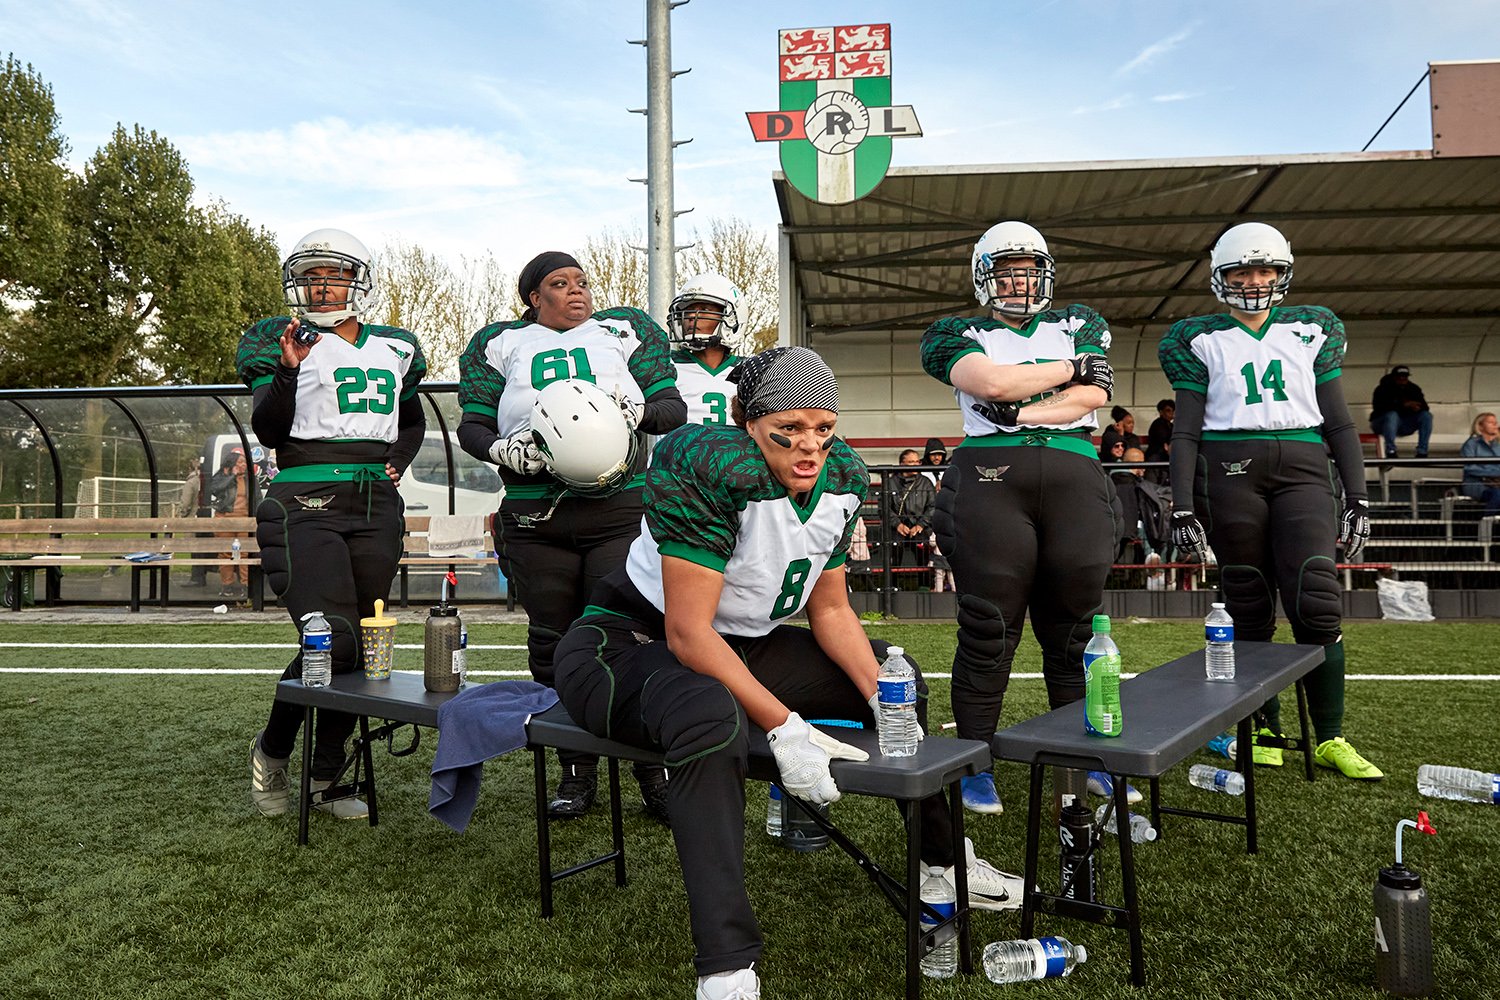  Together with her teammates, Dalila, a defensive end for the Rotterdam Ravens (center foreground), looks on as the Ravens' offense plays against the Eindhoven Valkyries, Rotterdam, NL, 2021. 